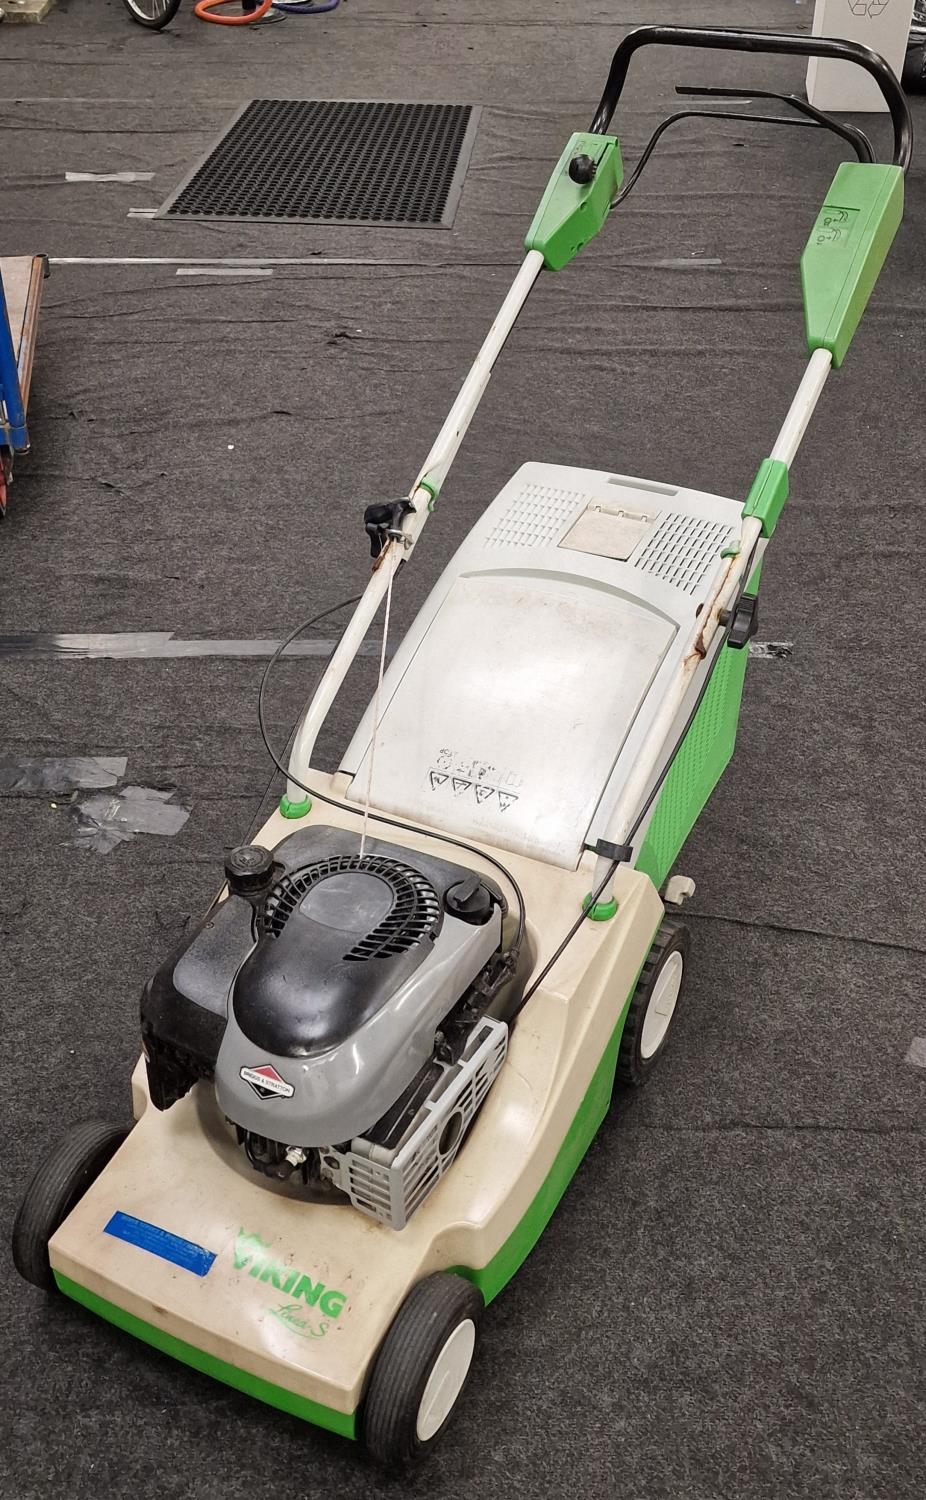 Briggs and Stratton "Viking" petrol lawn mower working at time cataloging